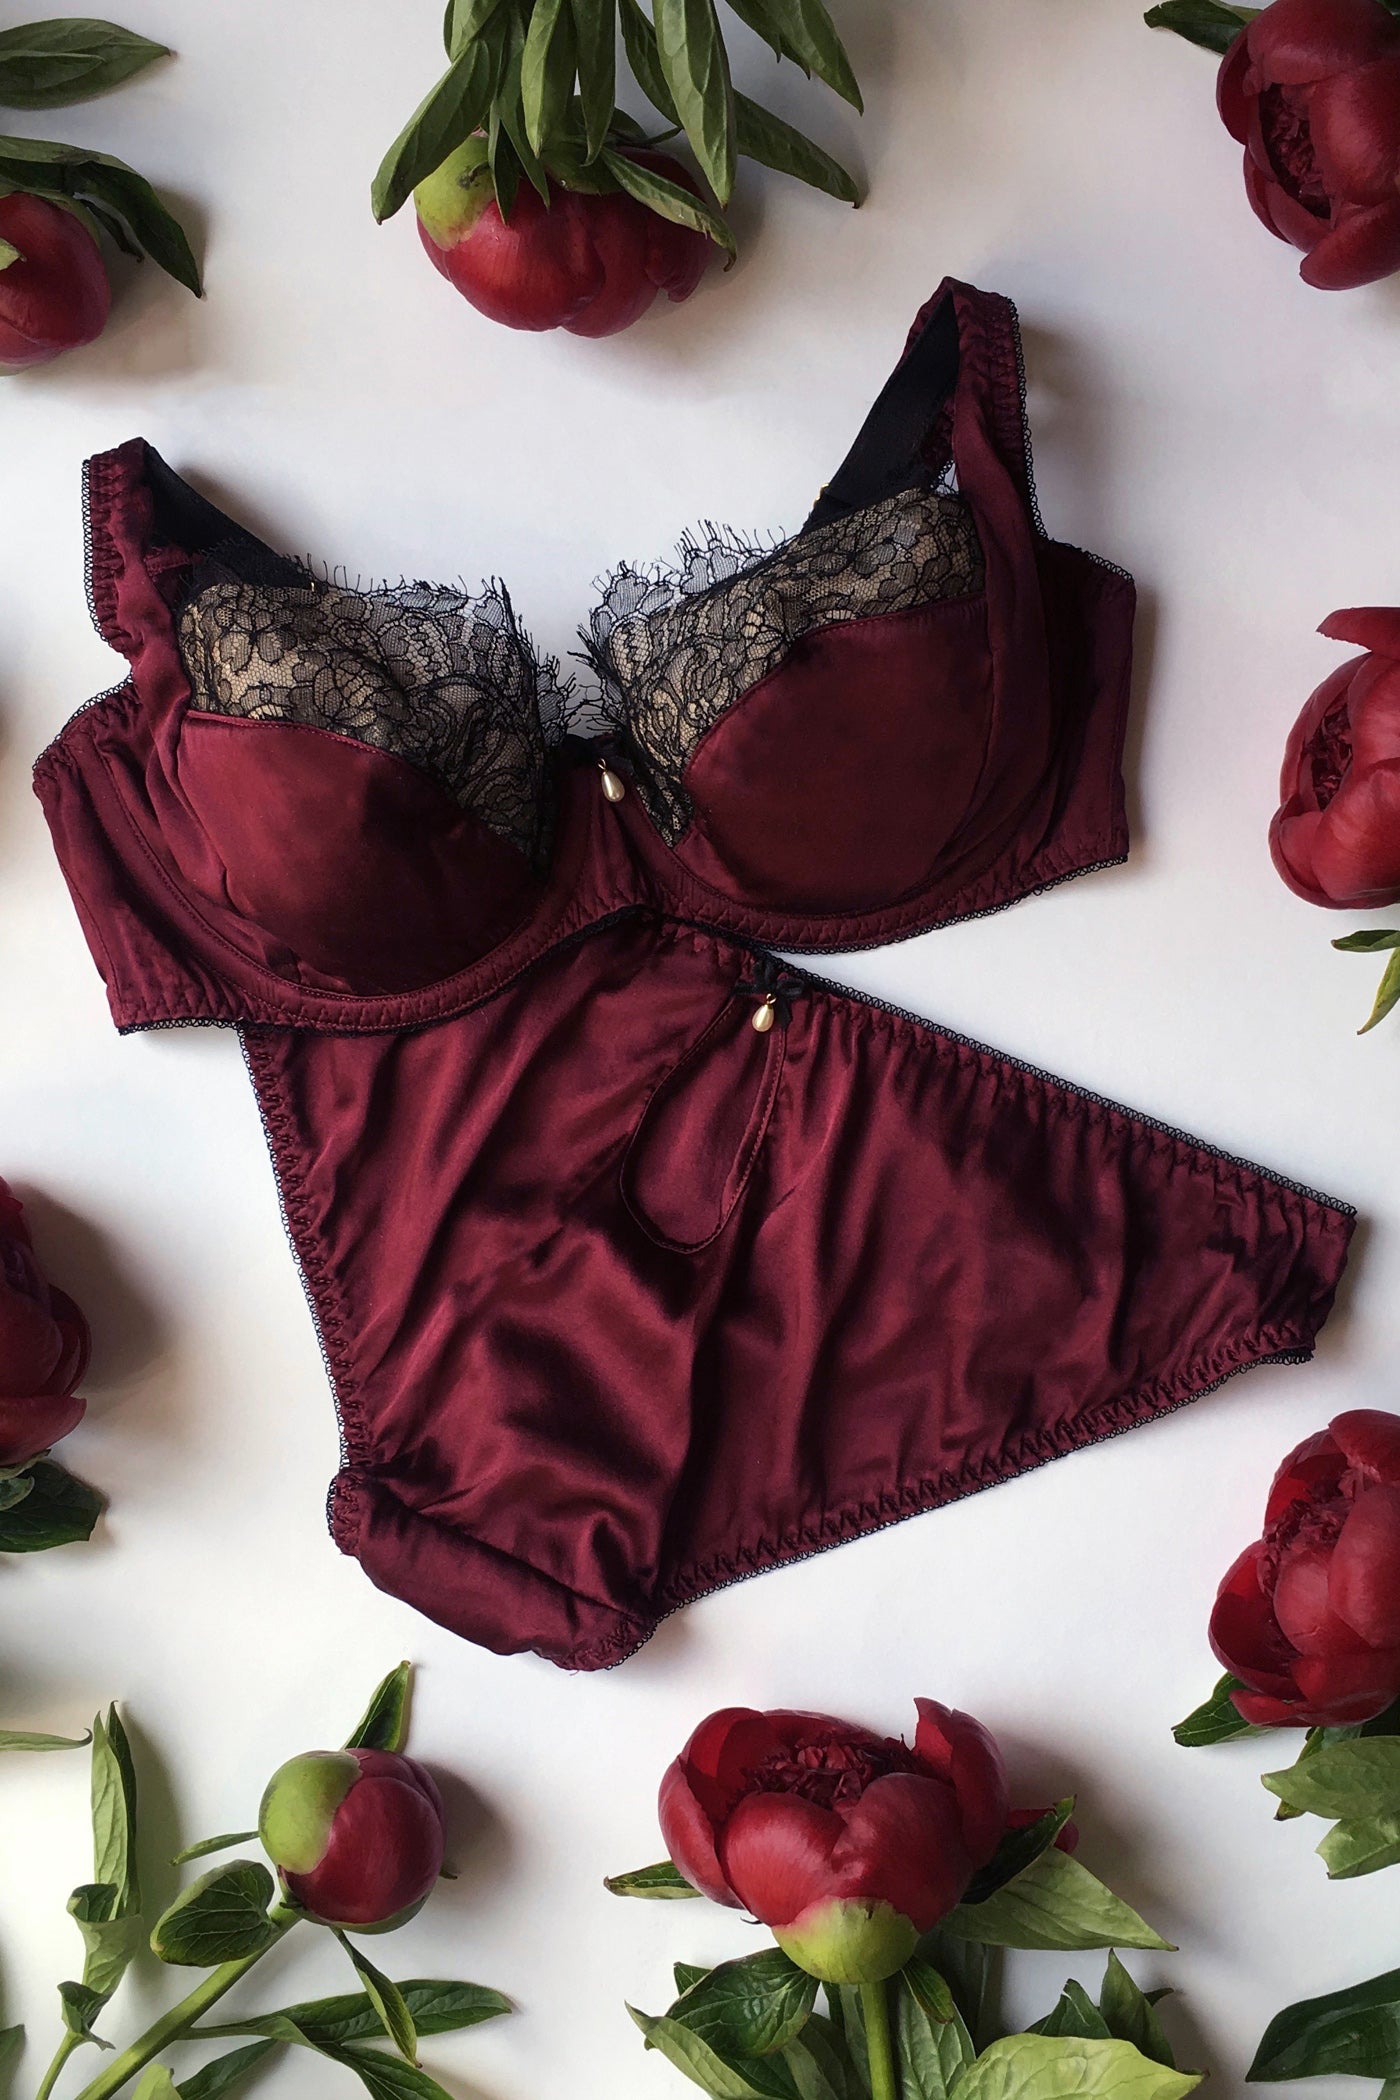 Silk and lace bra and panty in dark red silk and black lace flatlay, with pearl detail on both